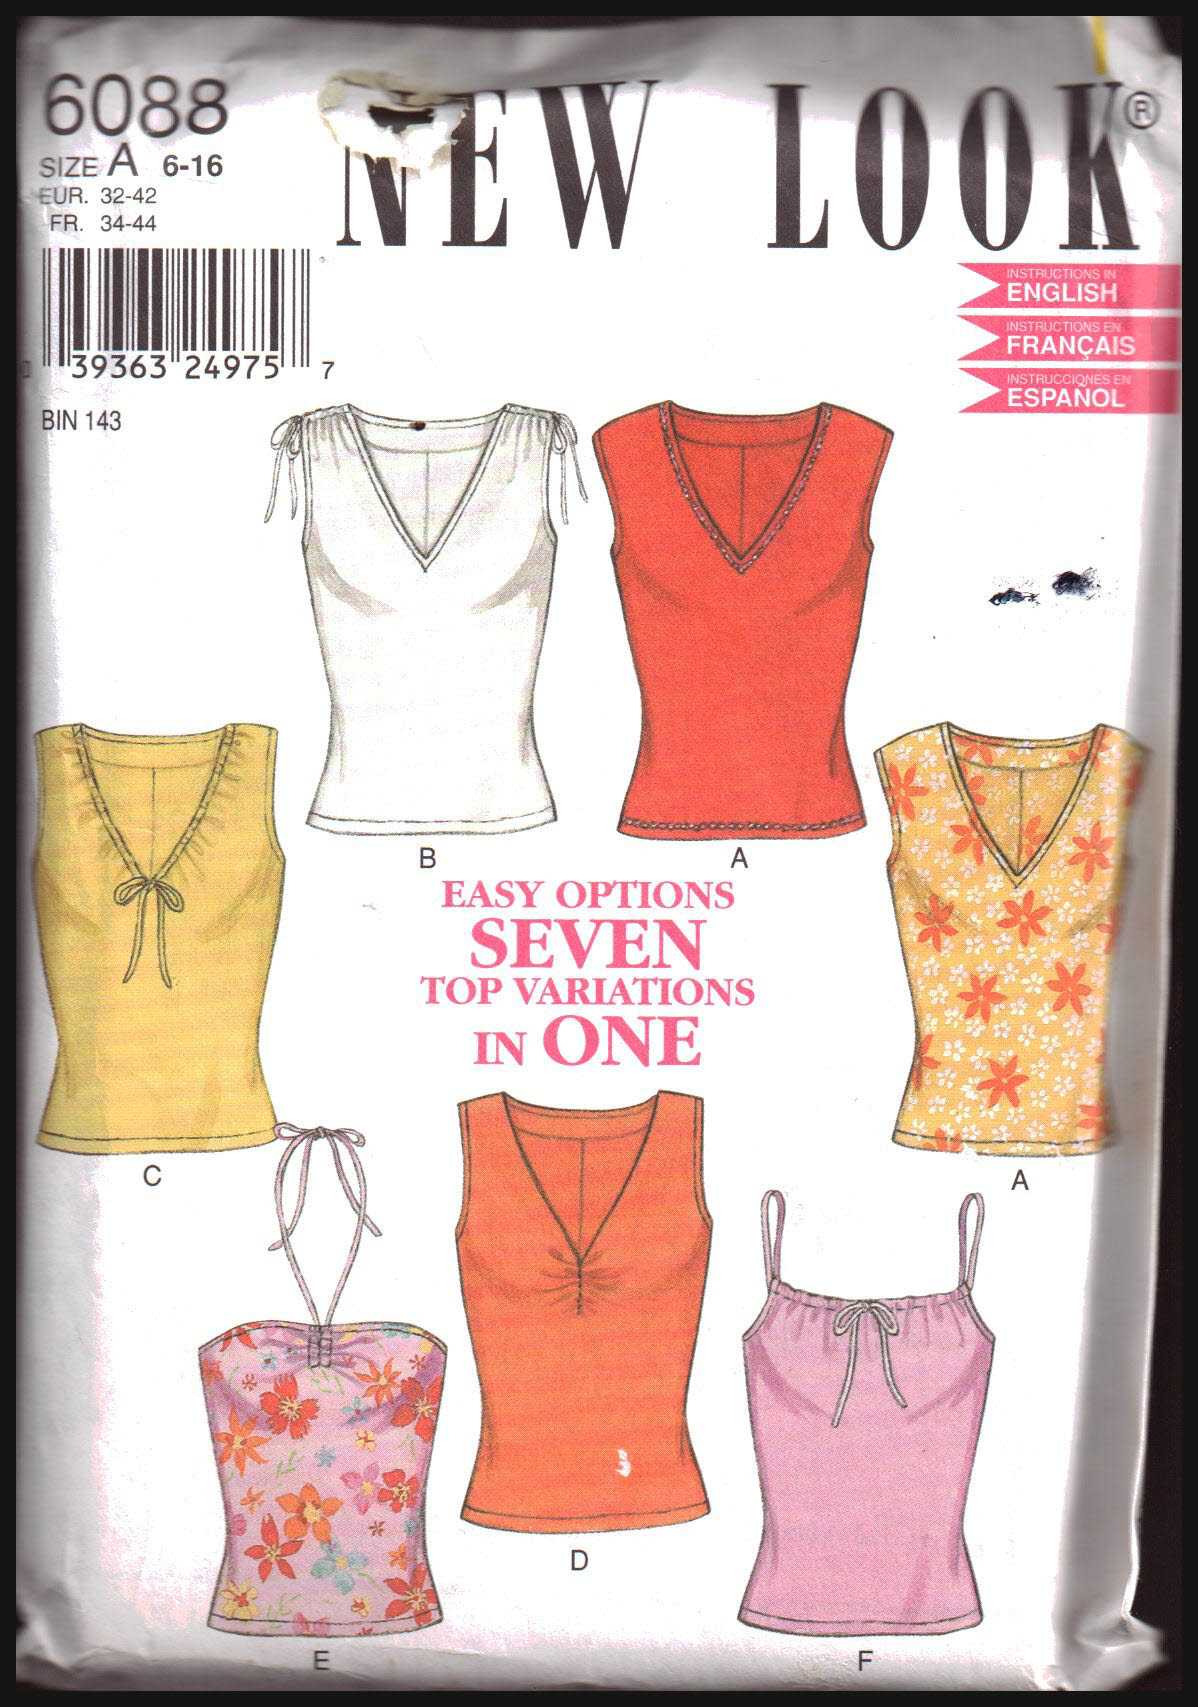 New Look 6088 Tops Size: A 6-16 Uncut Sewing Pattern